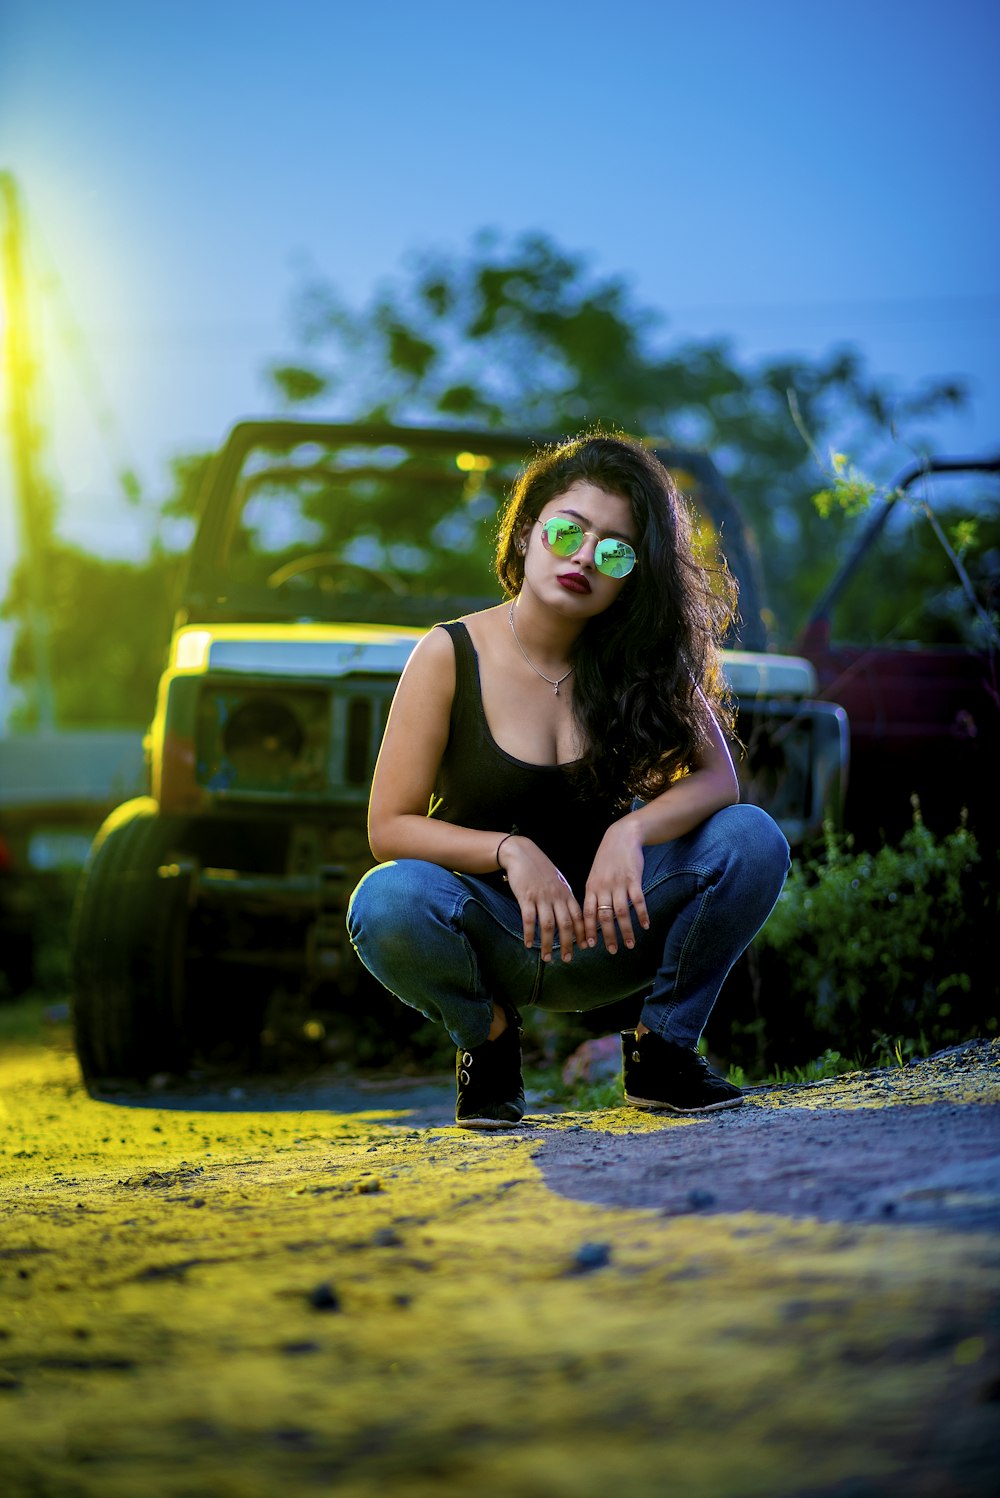 a woman in a black tank top and jeans crouching in front of a truck